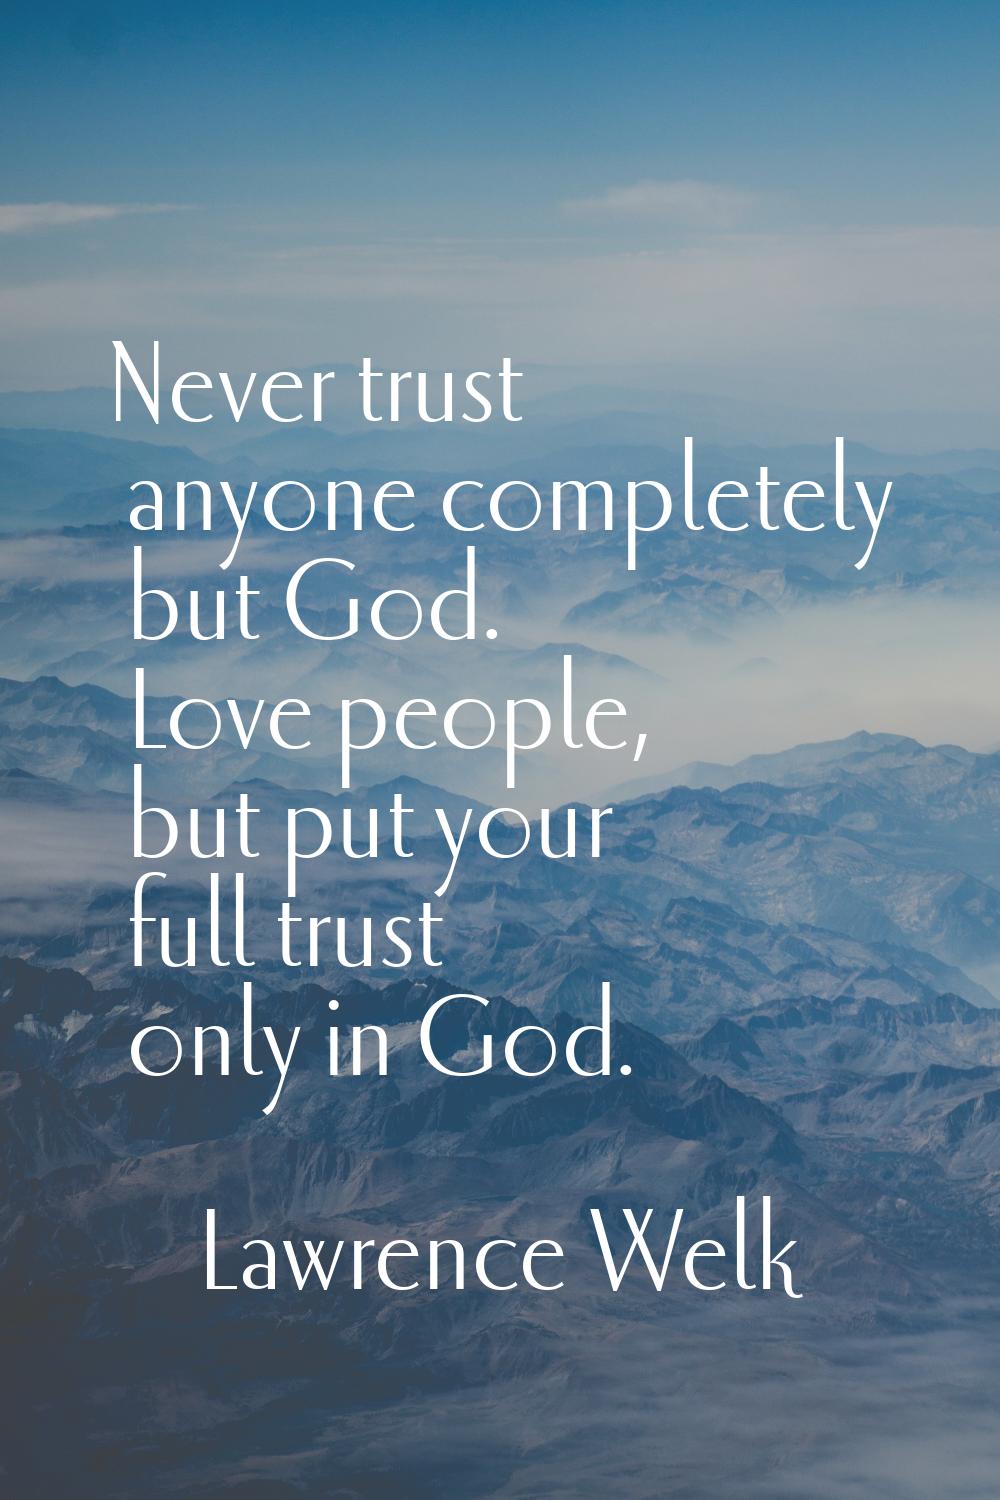 Never trust anyone completely but God. Love people, but put your full trust only in God.